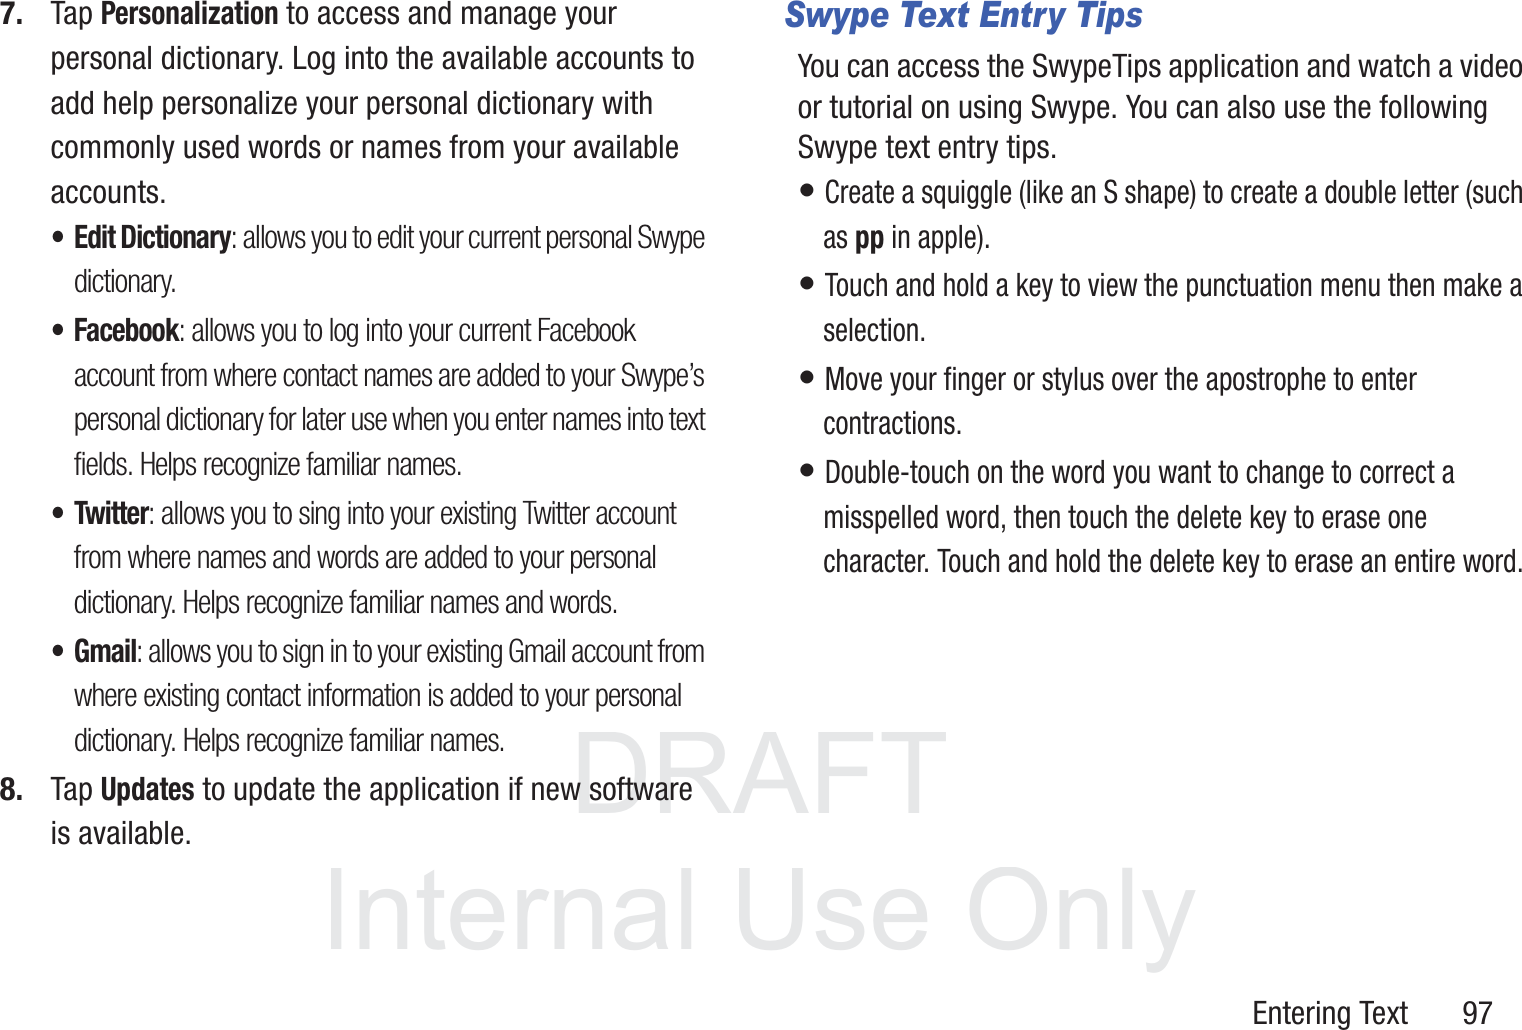 DRAFT InternalUse OnlyEntering Text       977. Tap Personalization to access and manage your personal dictionary. Log into the available accounts to add help personalize your personal dictionary with commonly used words or names from your available accounts.• Edit Dictionary: allows you to edit your current personal Swype dictionary.• Facebook: allows you to log into your current Facebook account from where contact names are added to your Swype’s personal dictionary for later use when you enter names into text fields. Helps recognize familiar names.• Twitter: allows you to sing into your existing Twitter account from where names and words are added to your personal dictionary. Helps recognize familiar names and words.•Gmail: allows you to sign in to your existing Gmail account from where existing contact information is added to your personal dictionary. Helps recognize familiar names.8. Tap Updates to update the application if new software is available.Swype Text Entry TipsYou can access the SwypeTips application and watch a video or tutorial on using Swype. You can also use the following Swype text entry tips.  • Create a squiggle (like an S shape) to create a double letter (such as pp in apple).• Touch and hold a key to view the punctuation menu then make a selection.• Move your finger or stylus over the apostrophe to enter contractions.• Double-touch on the word you want to change to correct a misspelled word, then touch the delete key to erase one character. Touch and hold the delete key to erase an entire word.